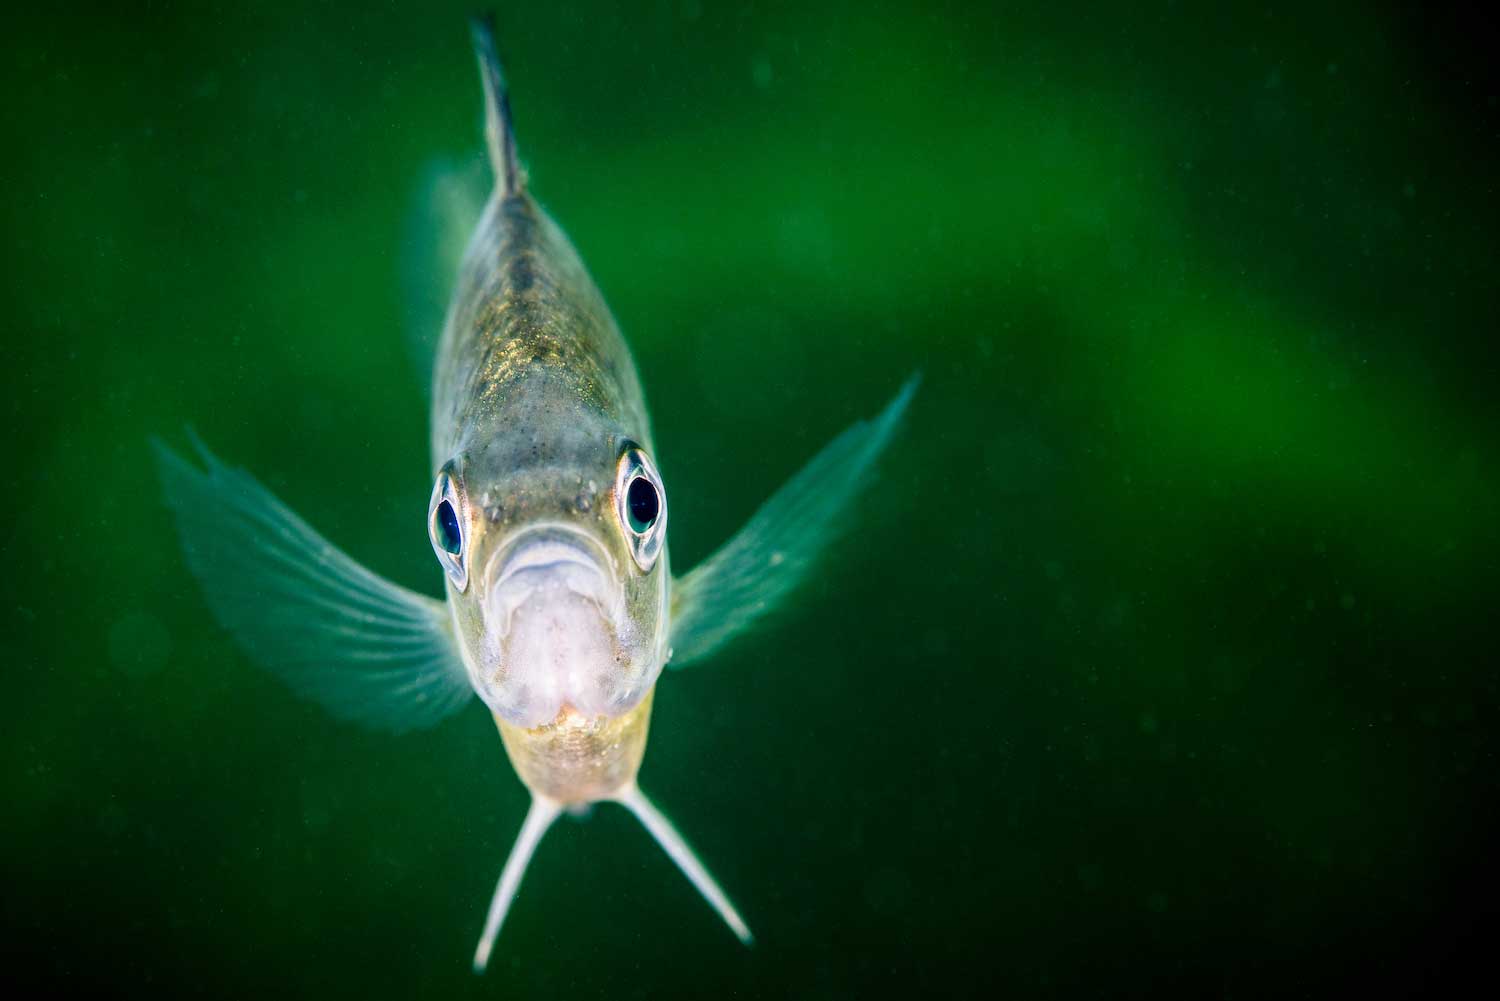 A bluegill swimming in the water.